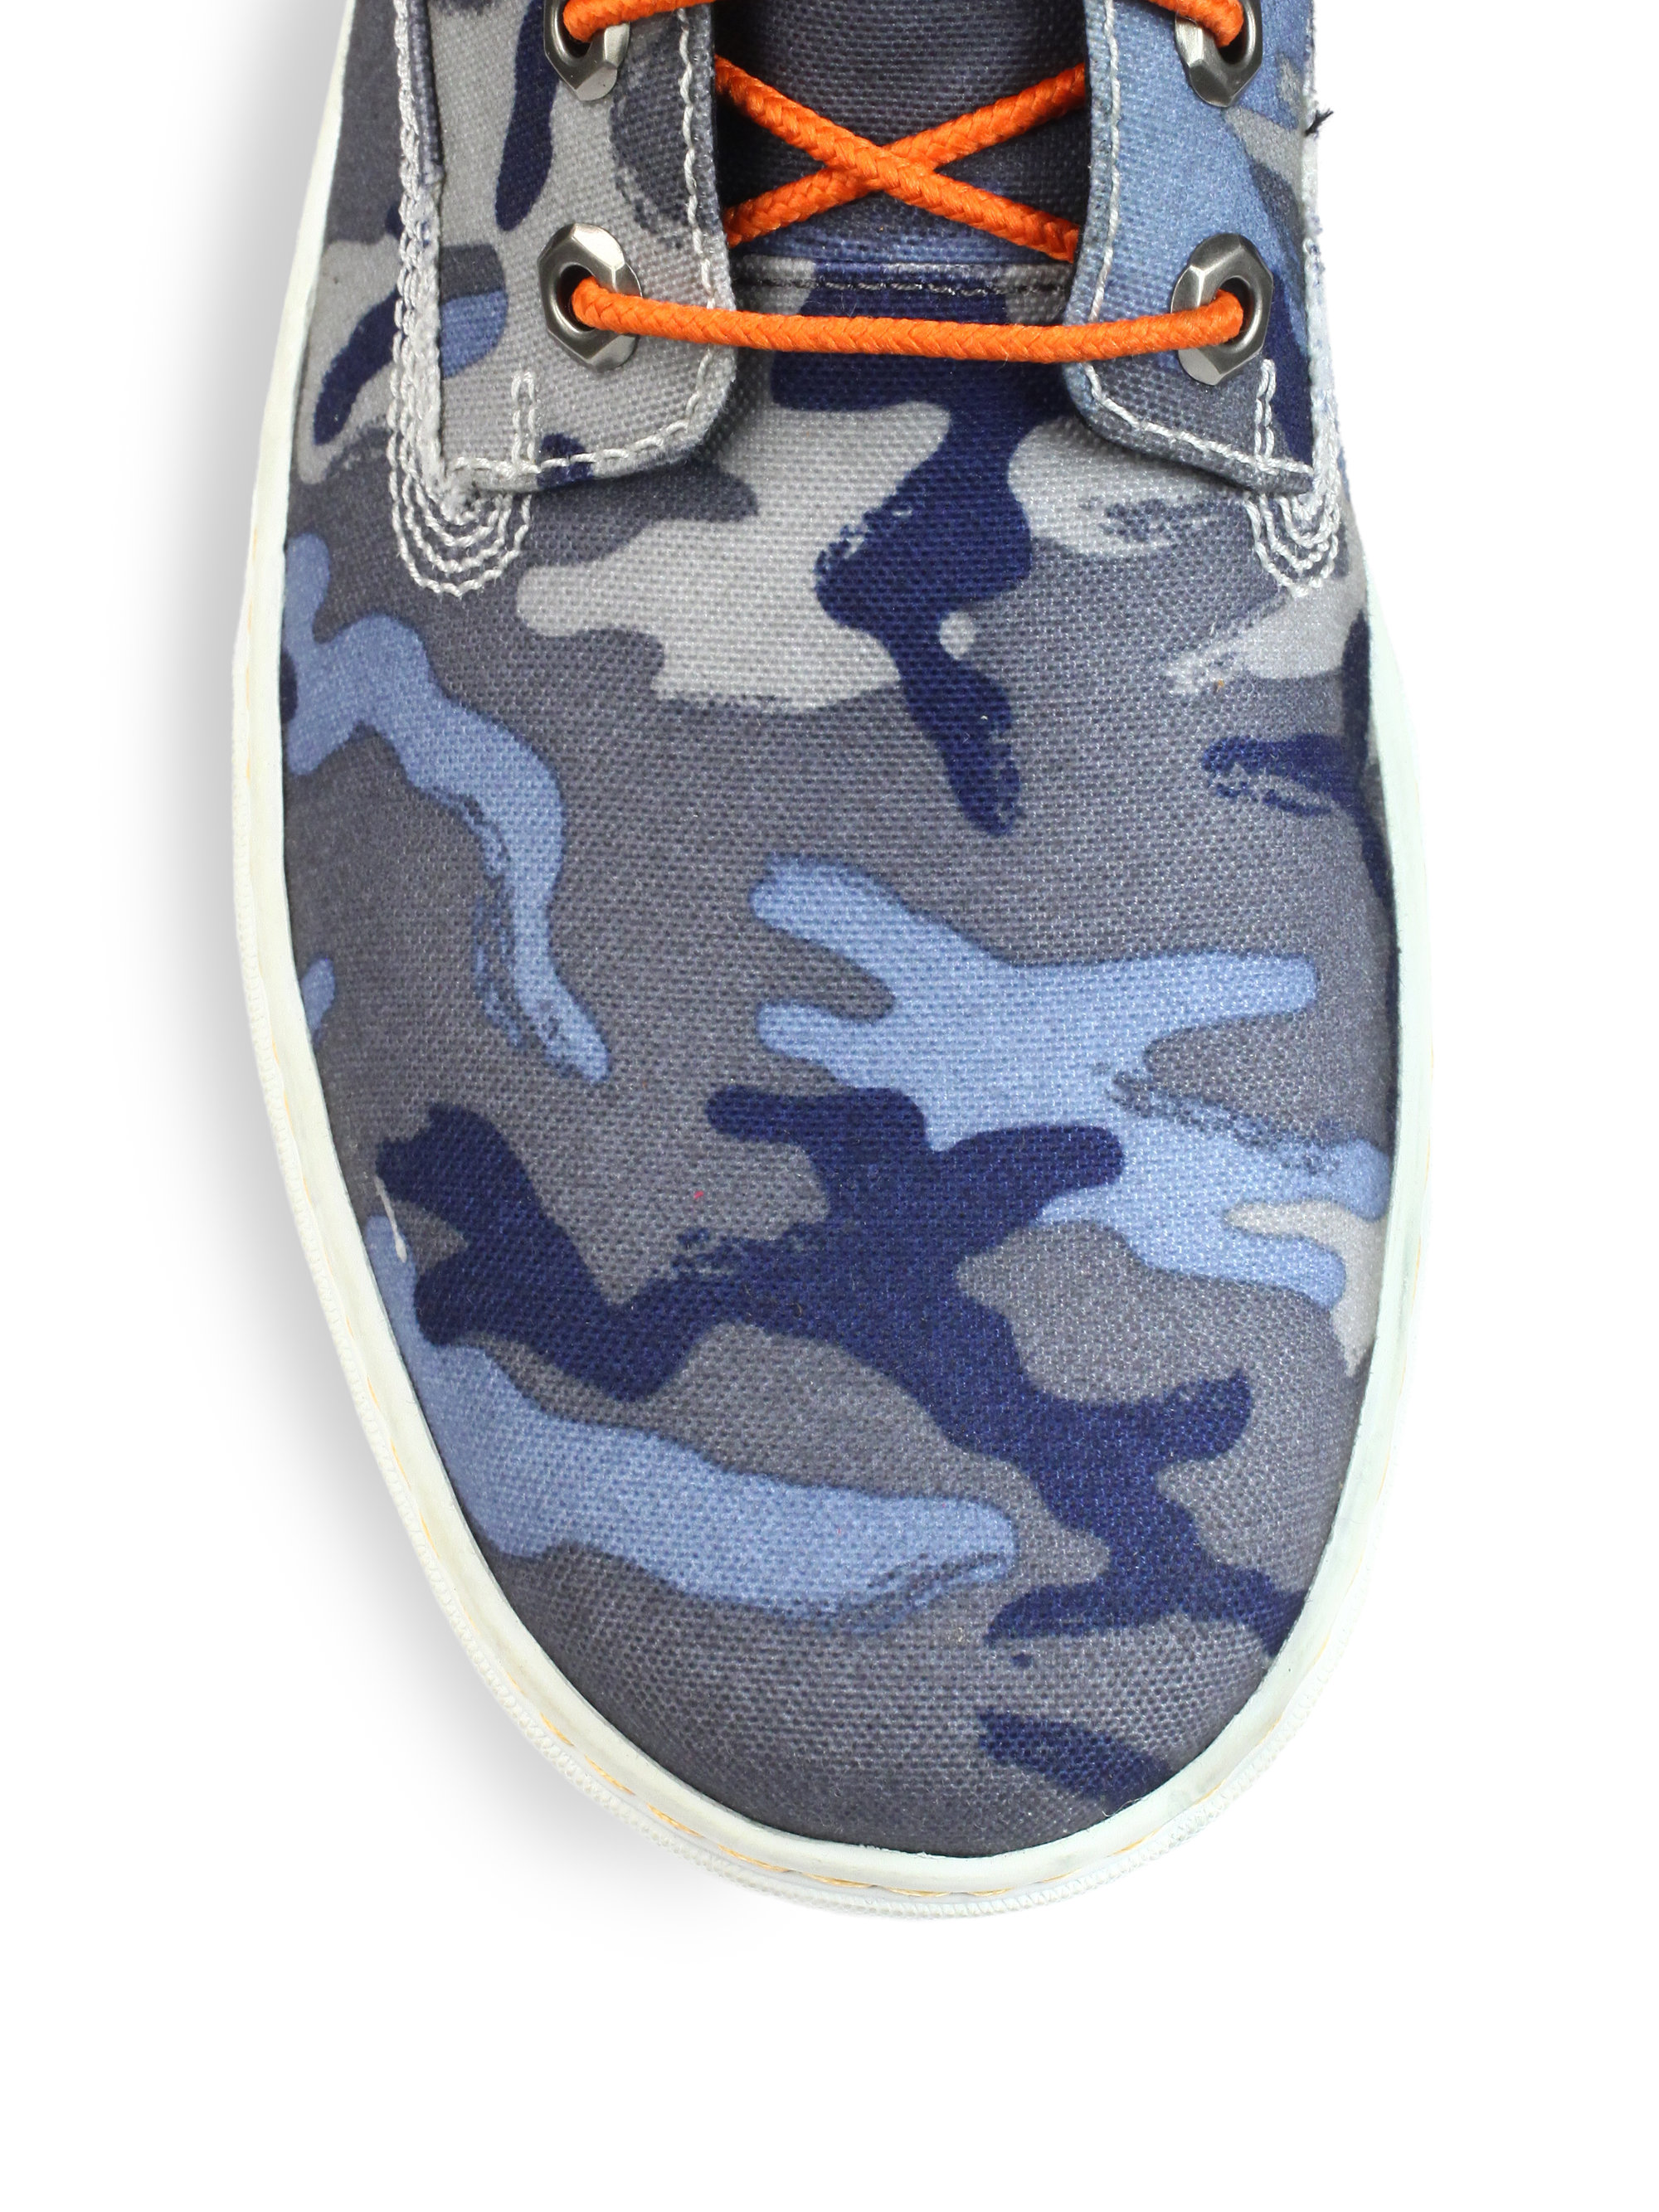 Timberland Blue Camo Boots for Men | Lyst